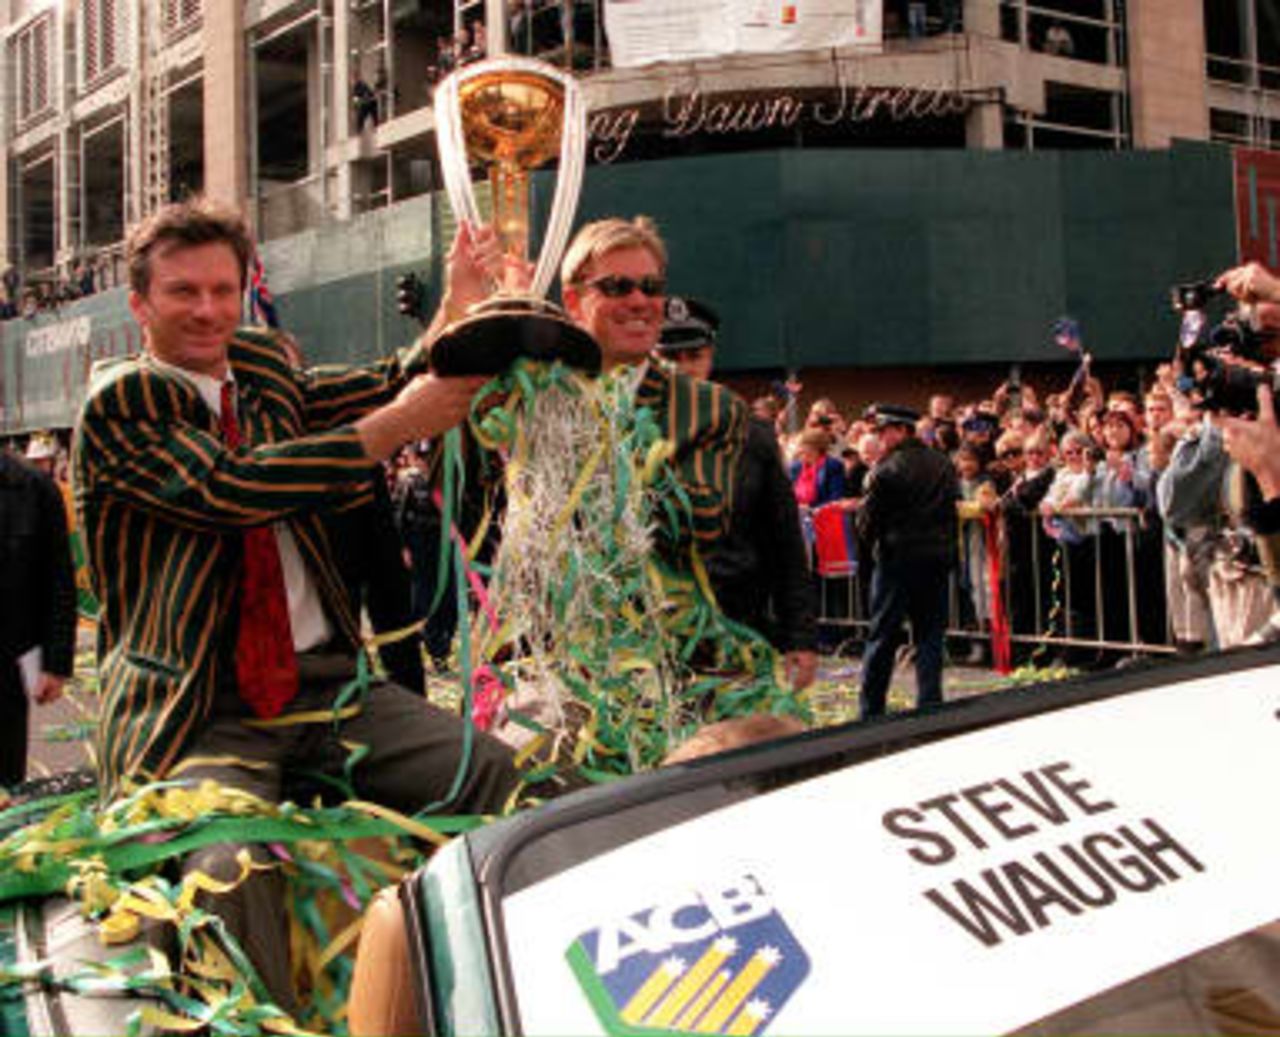 Australian cricket captain Steve Waugh (Left) and vice captain Shane Warne (2nd Left) hold the World Cup trophy during a parade through the streets of Sydney on 28th June 1999. The team was feted by some 100,000 people to mark the World Cup win earlier this month.